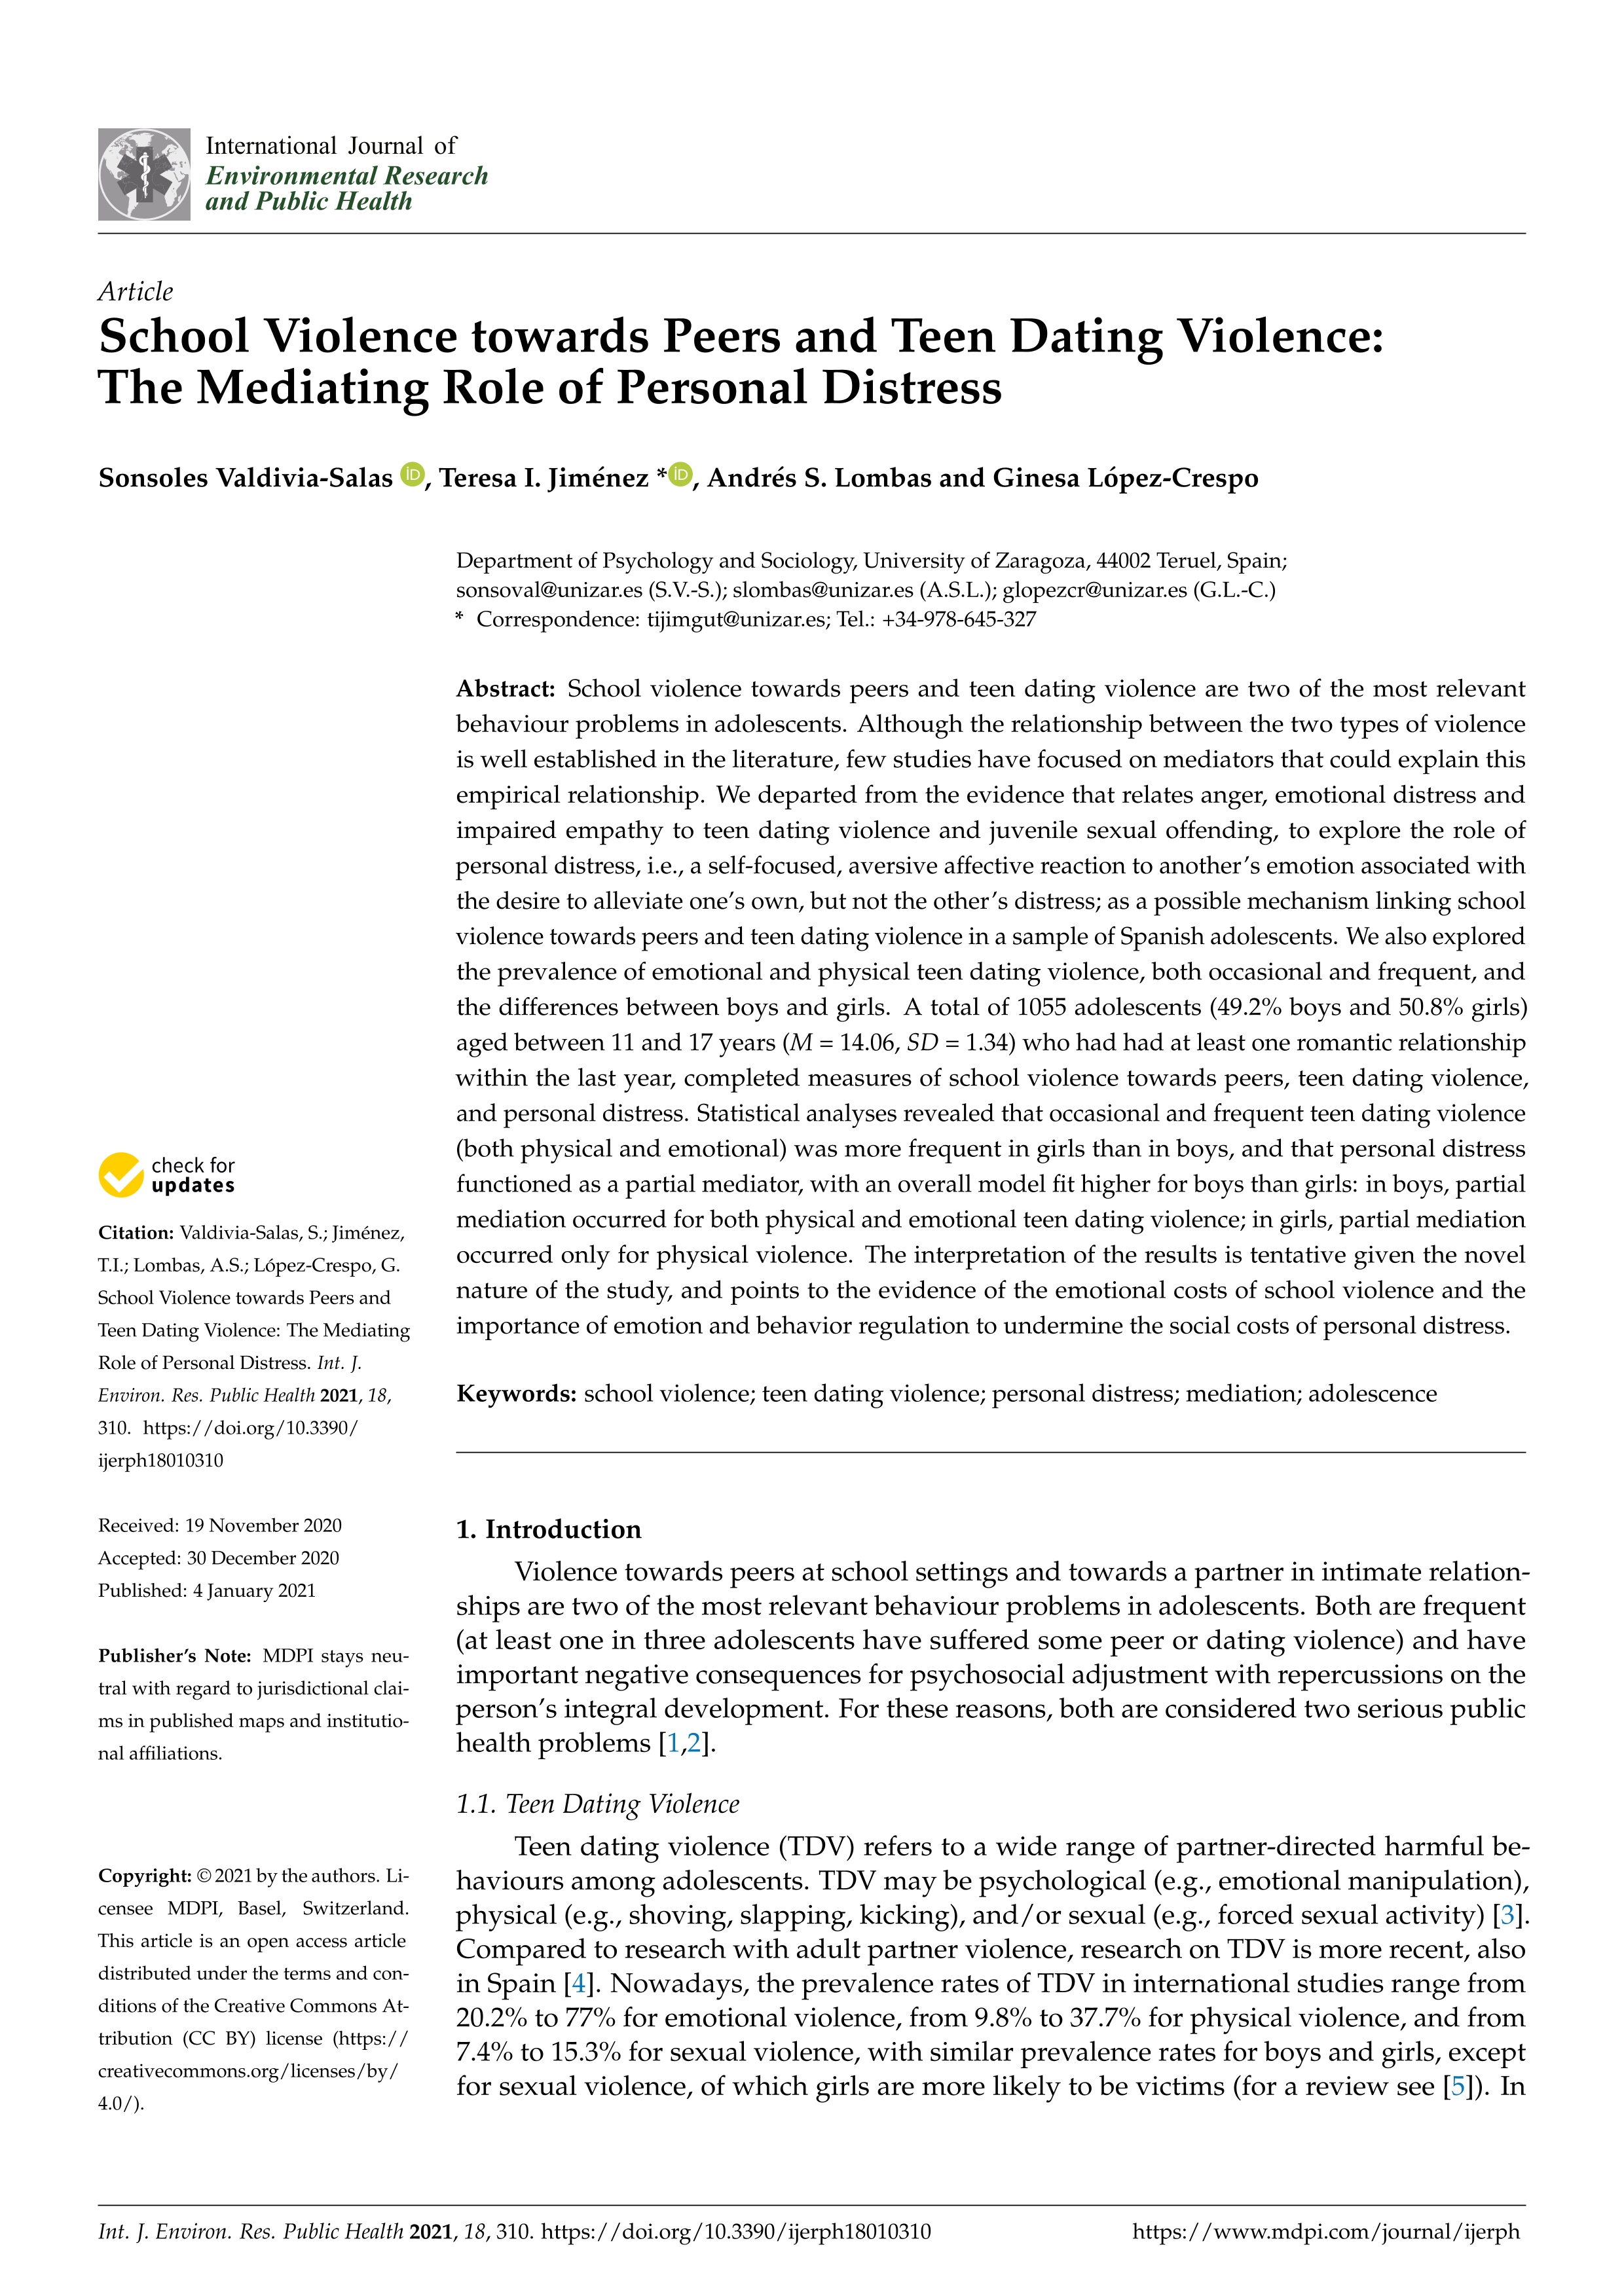 School violence towards peers and teen dating violence: the mediating role of personal distress